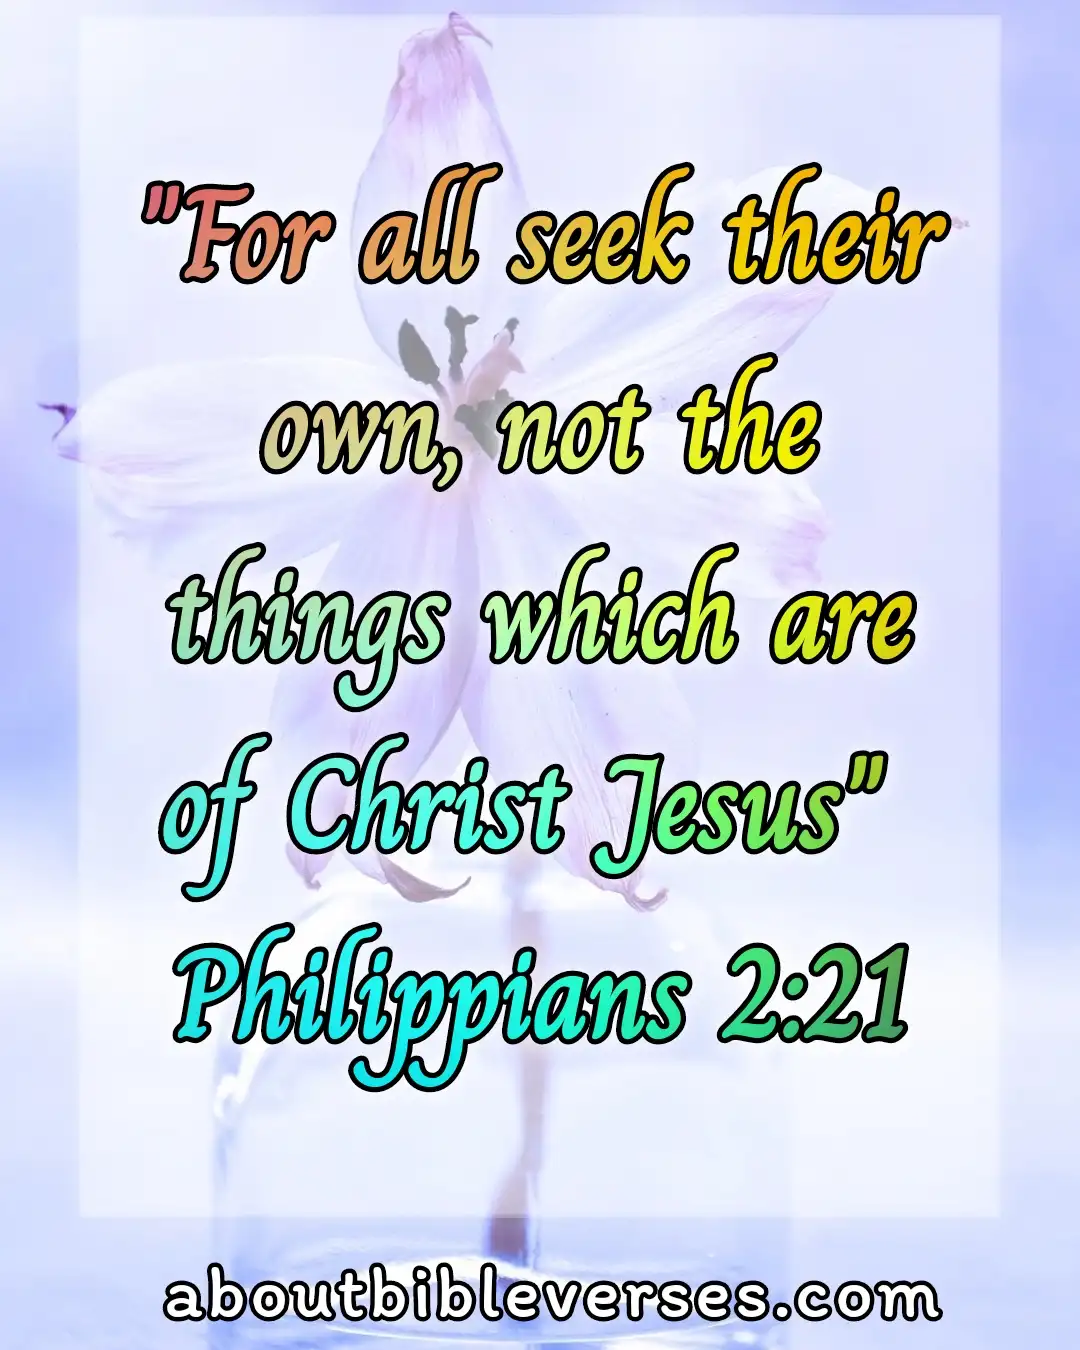 Bible say about Selfishness (Philippians 2:21)